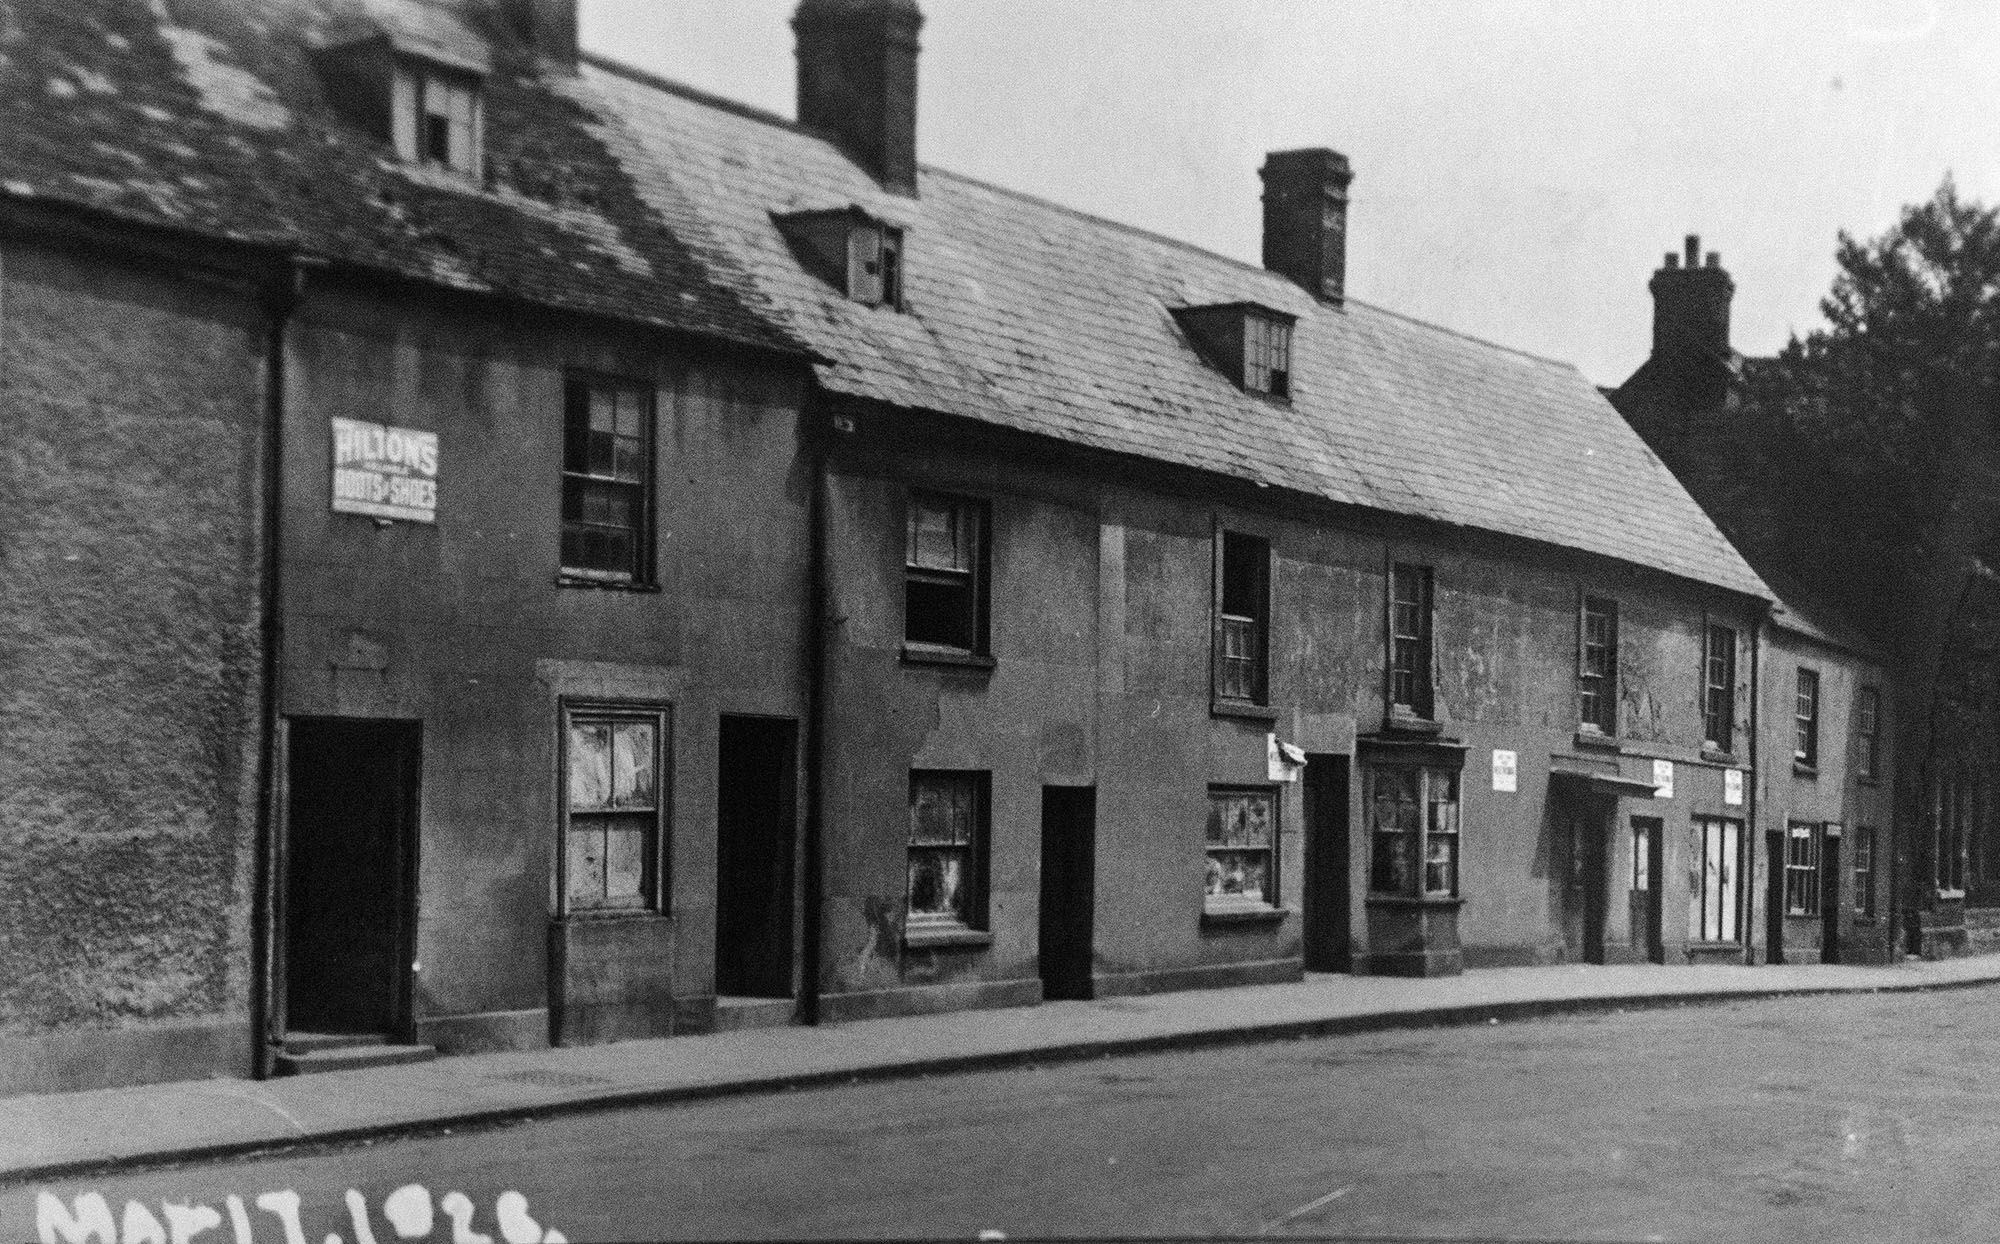 The cottages on Sheep Street that were demolished to make way for the new church.